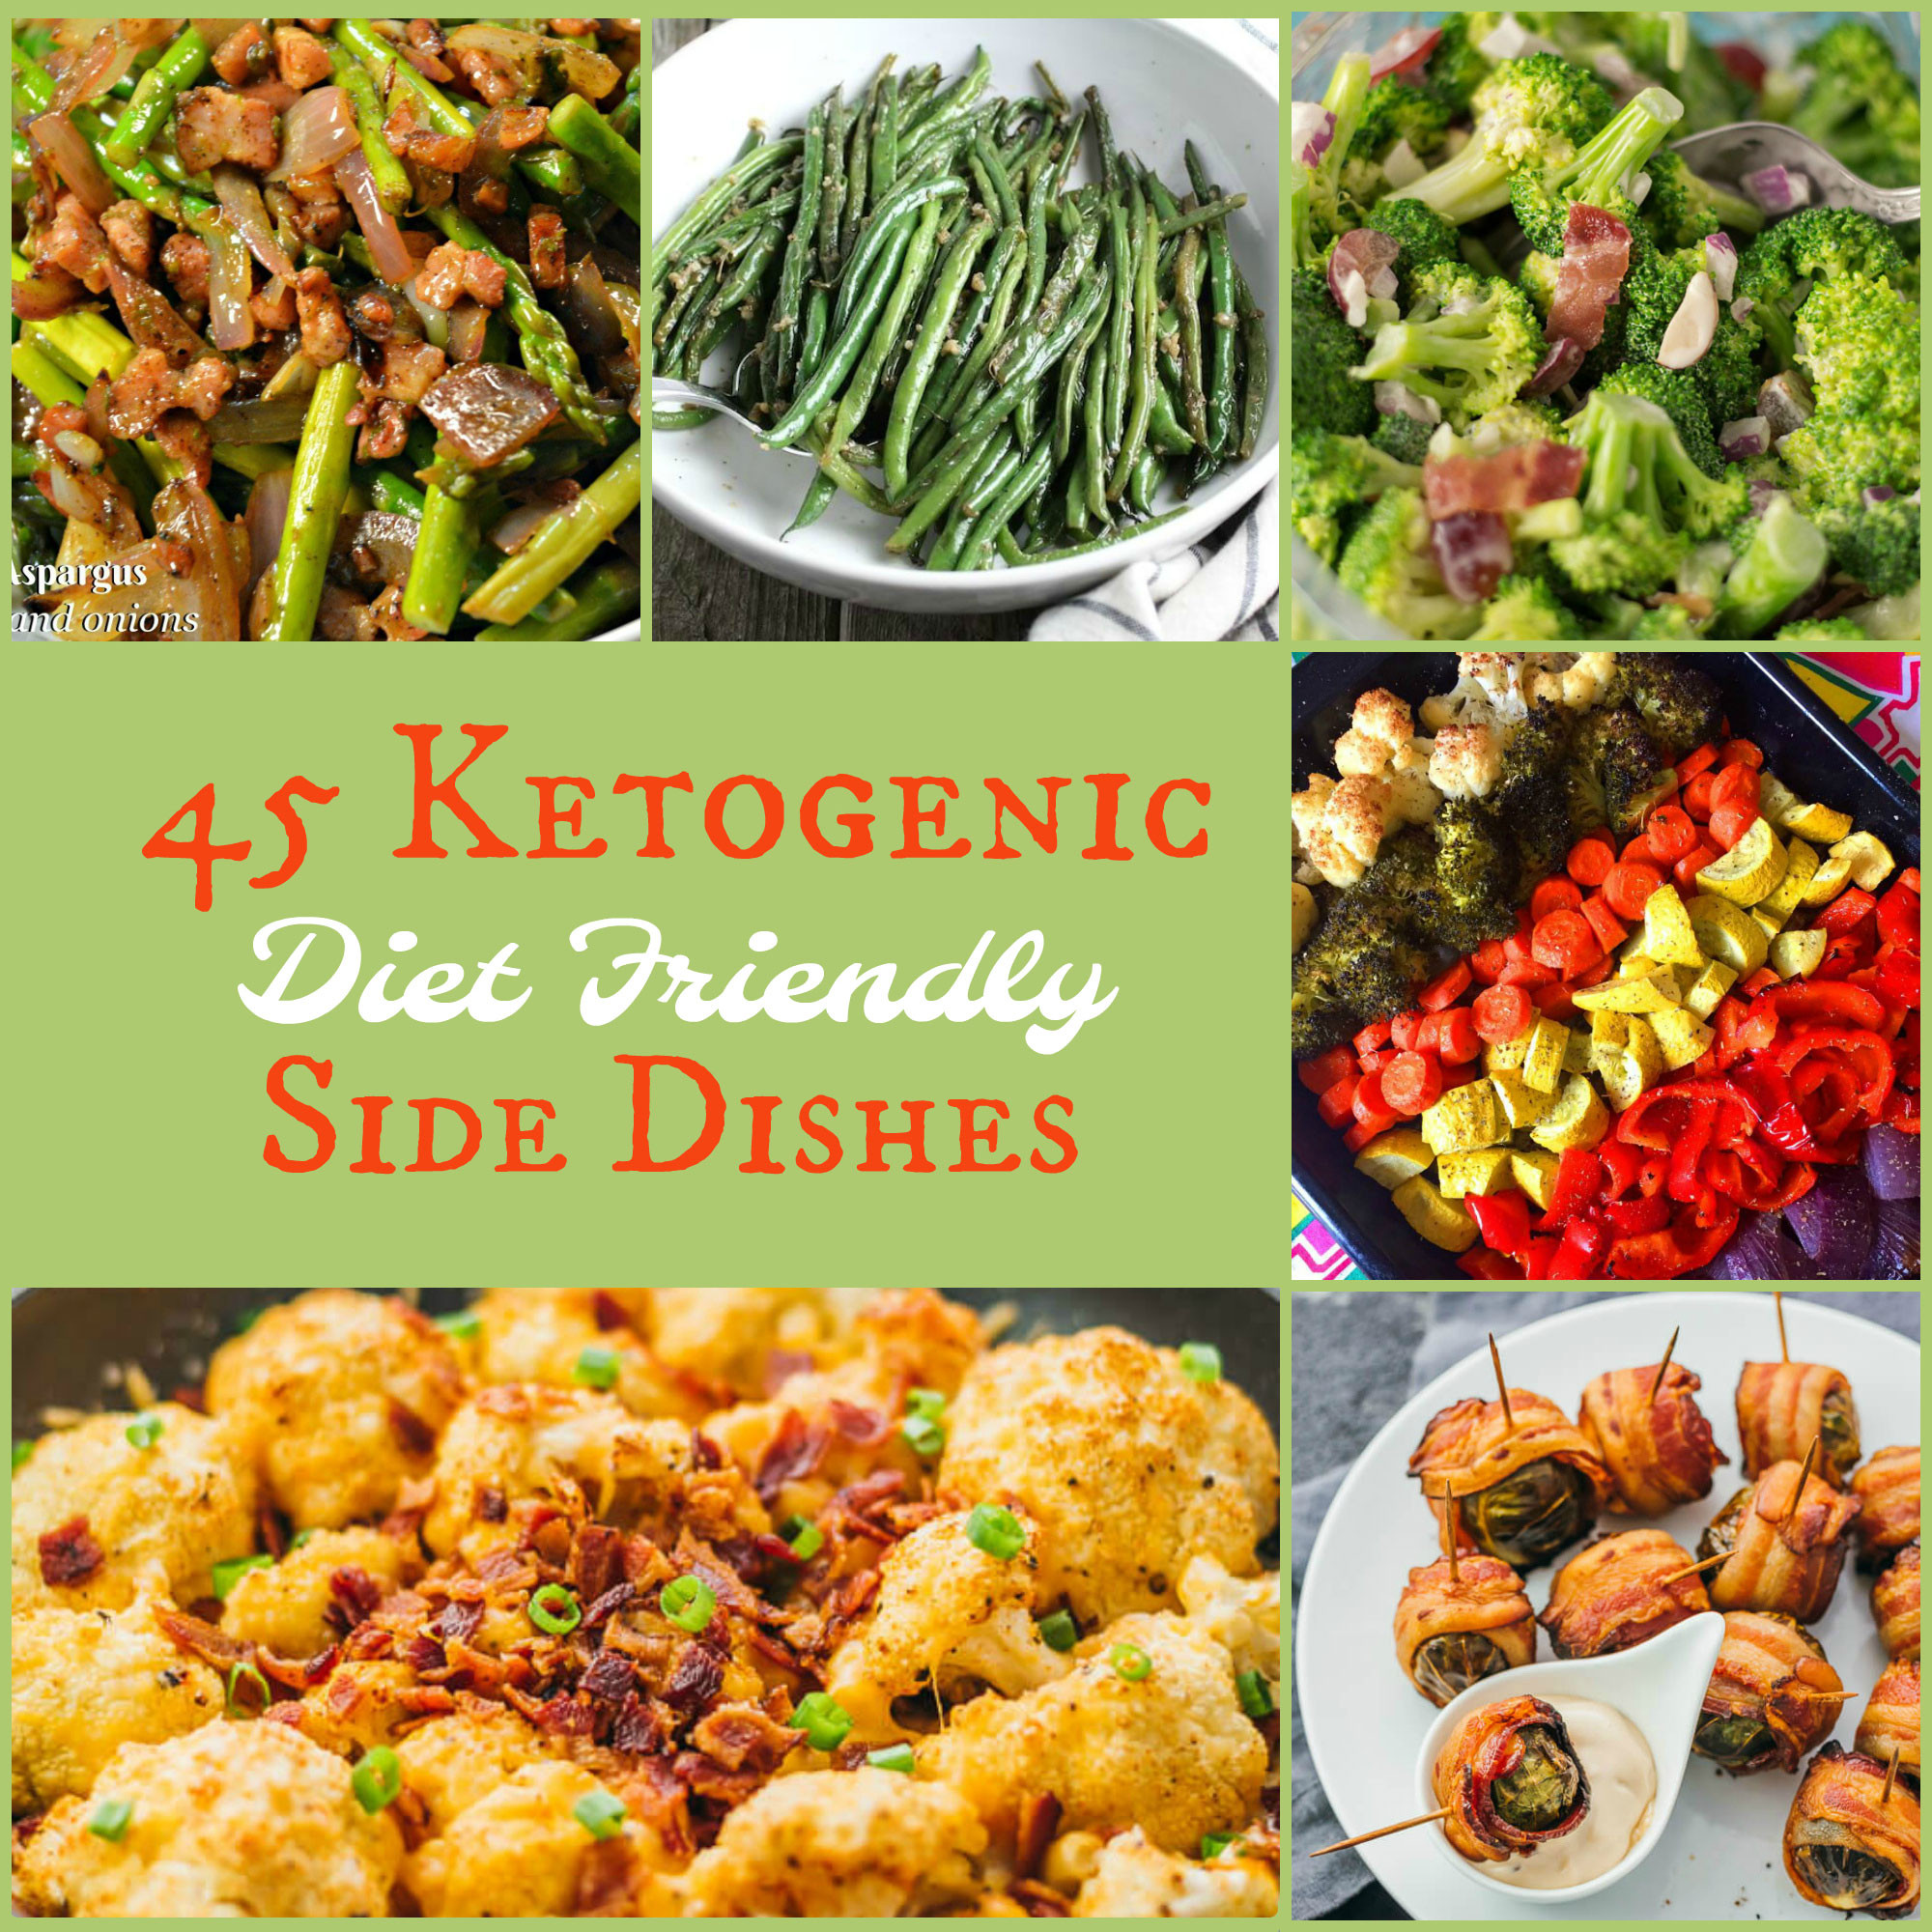 Easy Keto Sides
 Keto Diet Side Dishes for the Holidays Ketogenic recipe